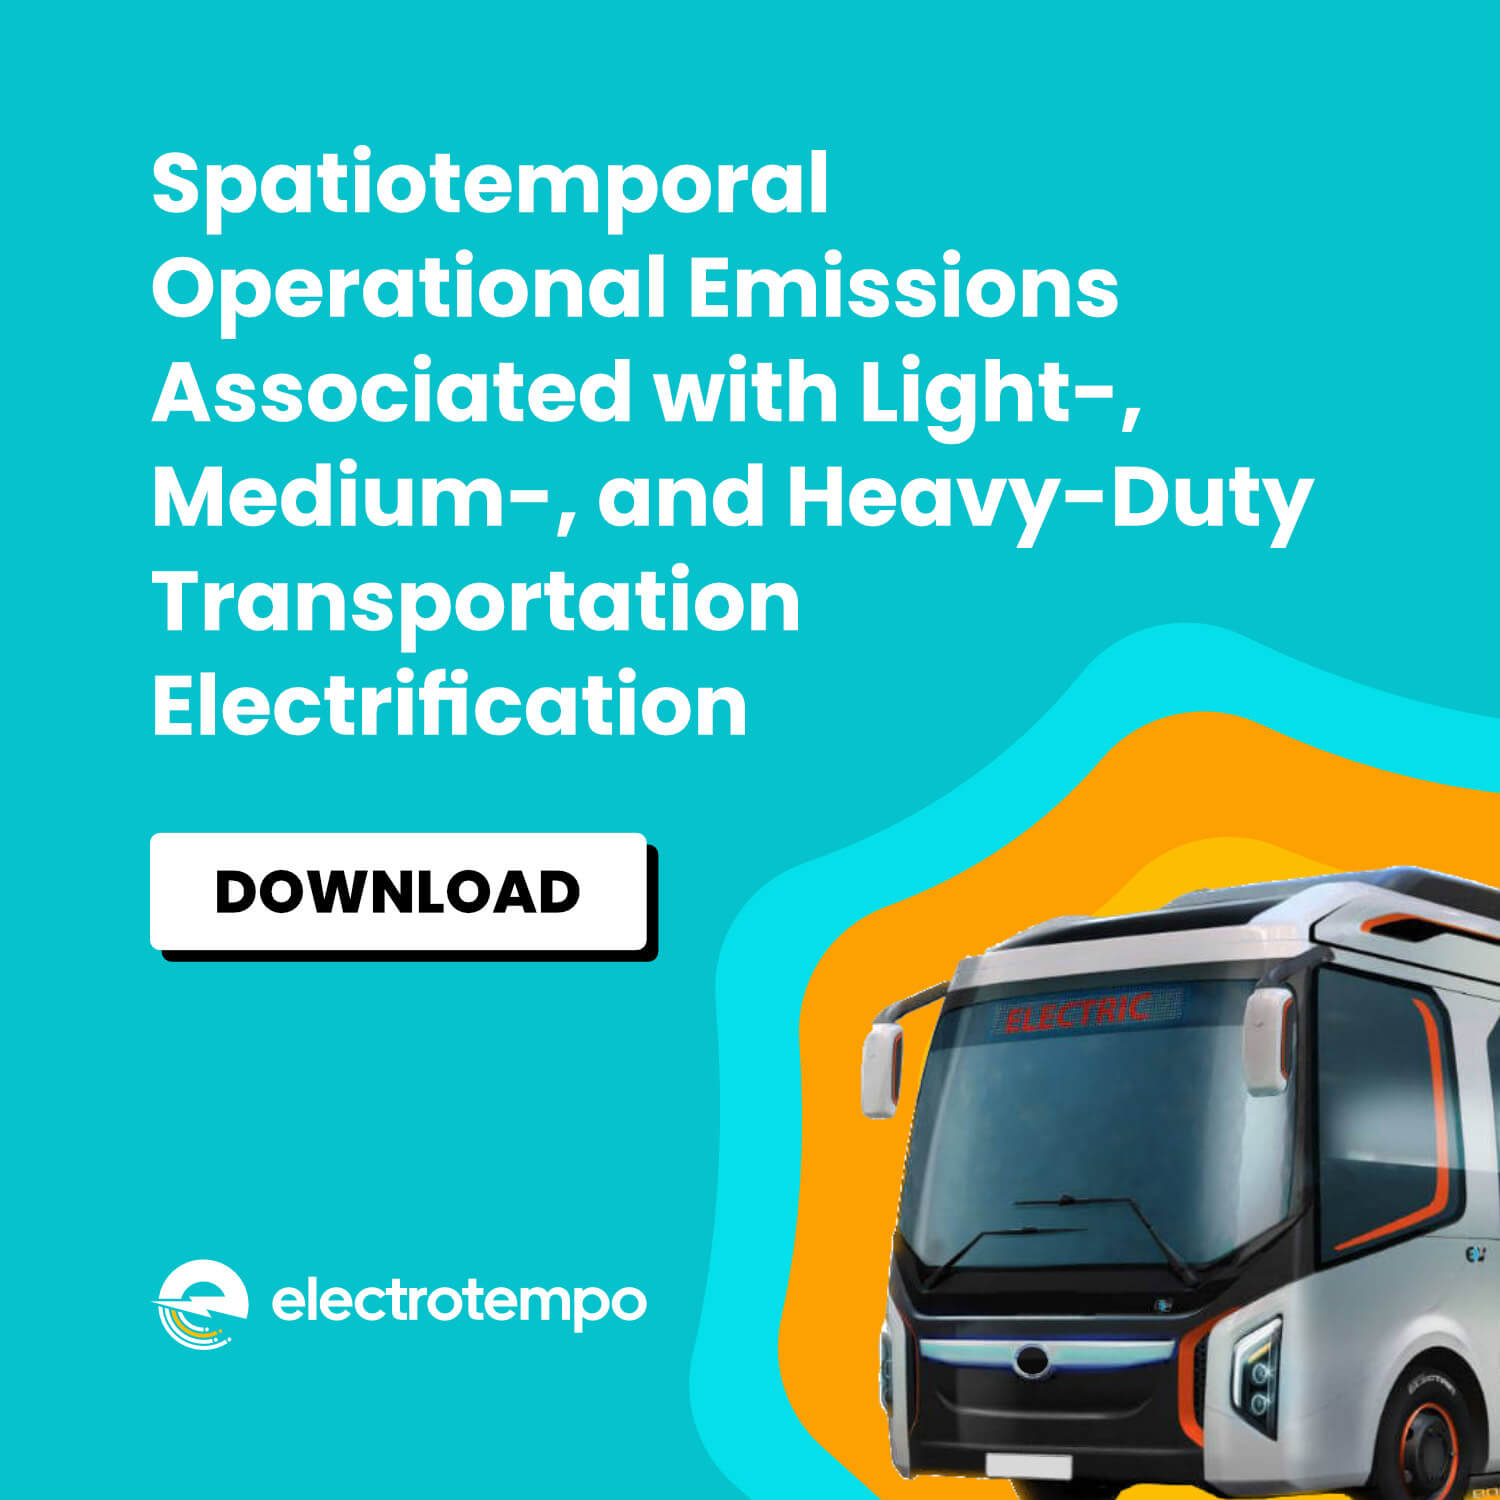 Featured Image for “Paper: Spatiotemporal Operational Emissions Associated with Light-, Medium-, and Heavy-Duty Transportation Electrification”